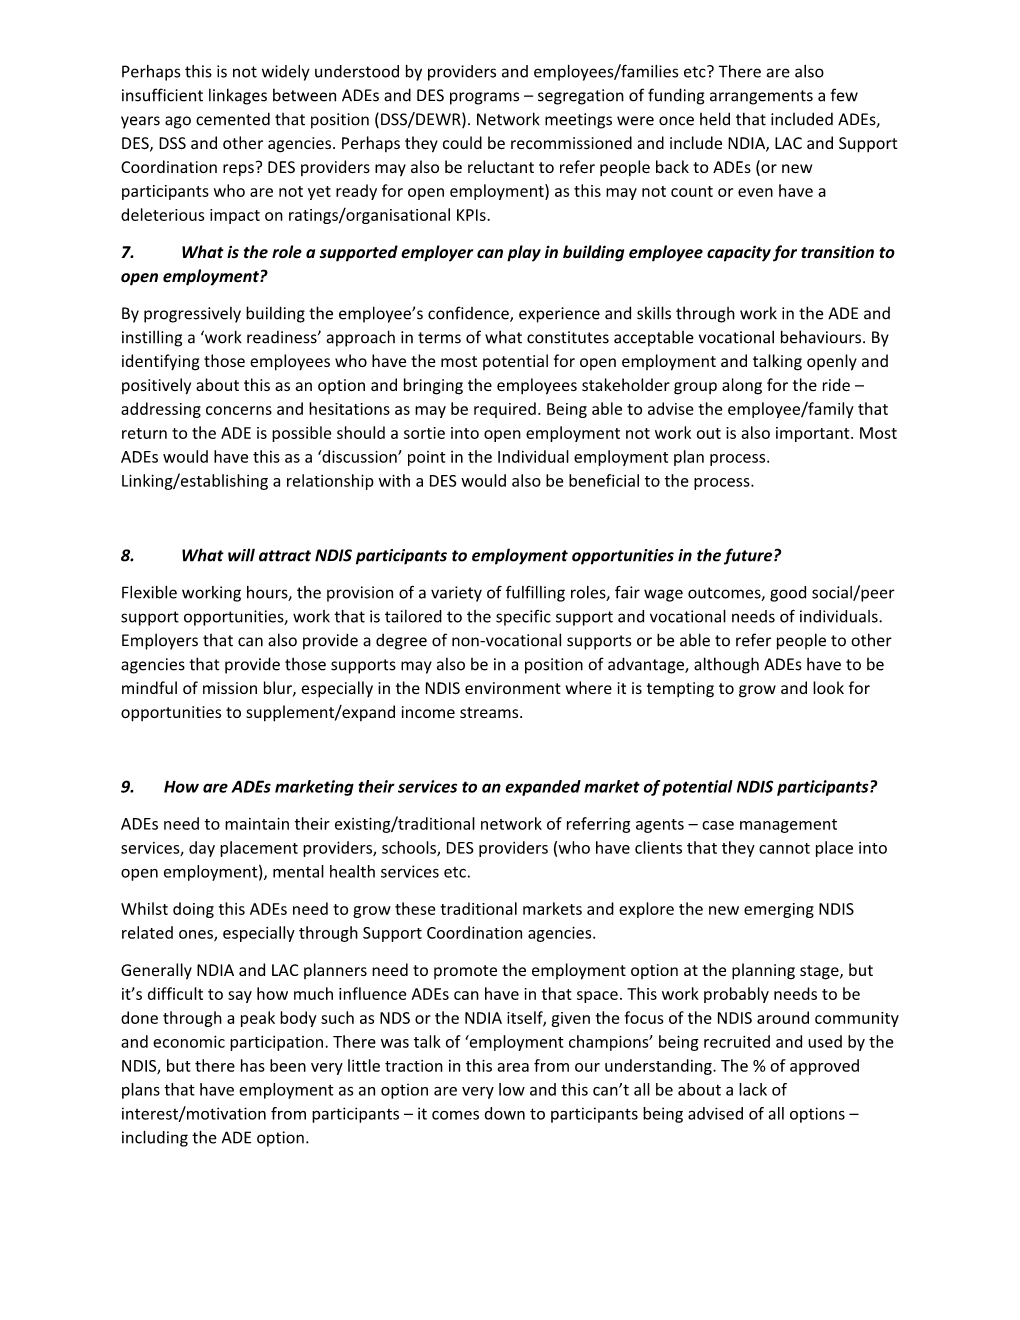 Ability Works Australia S Response to Questions Posed in the Discussion Paper March 2018